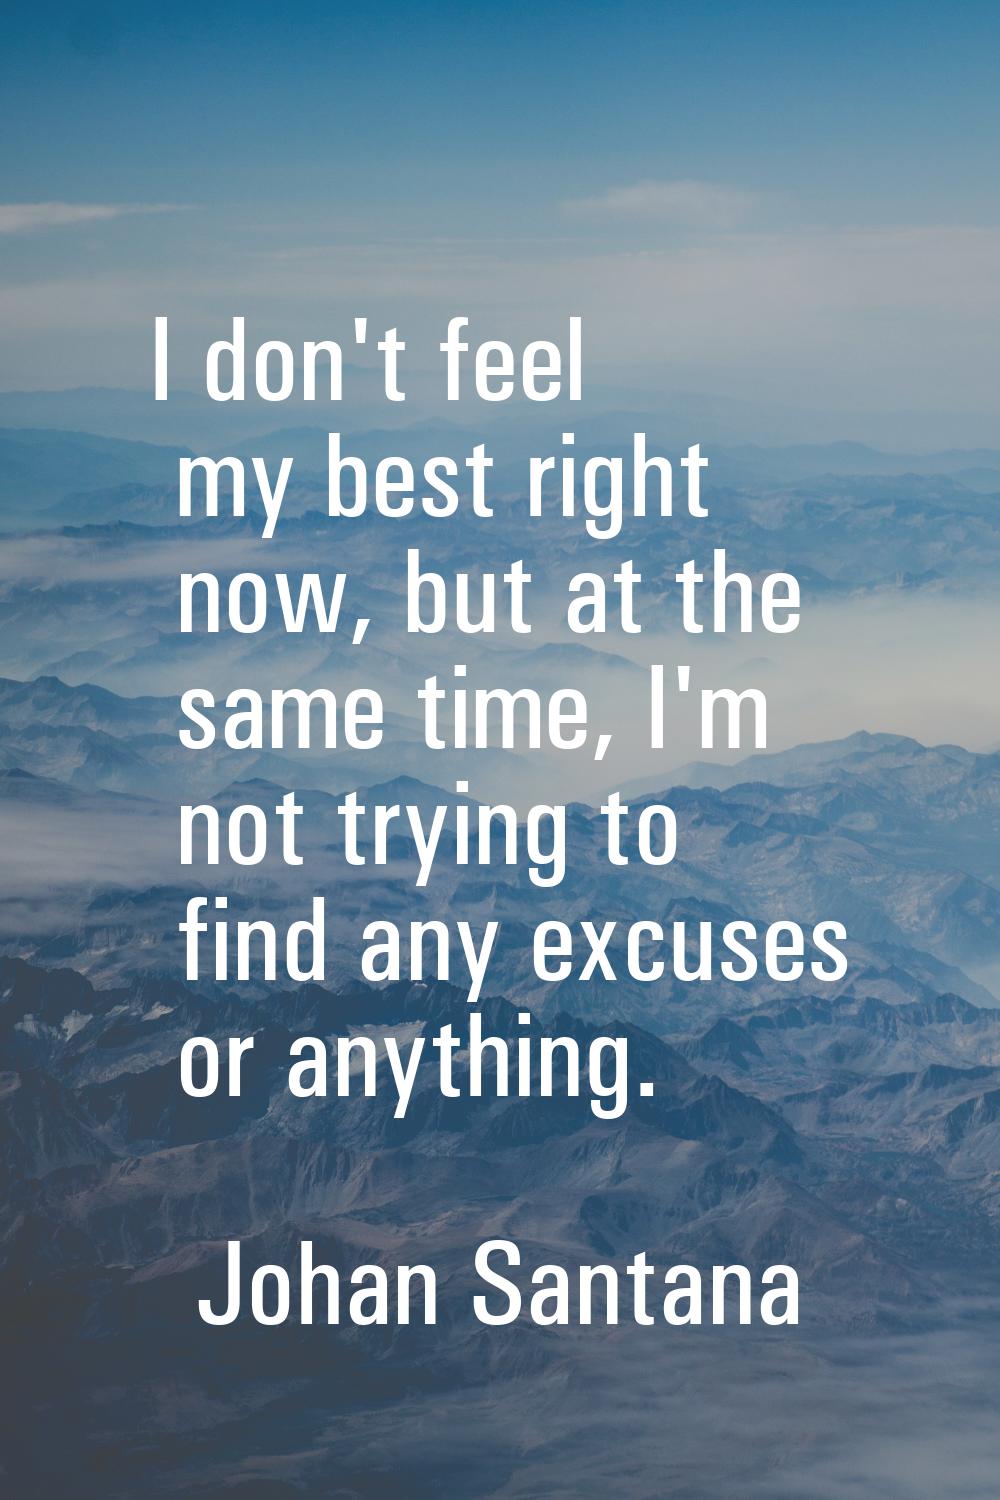 I don't feel my best right now, but at the same time, I'm not trying to find any excuses or anythin